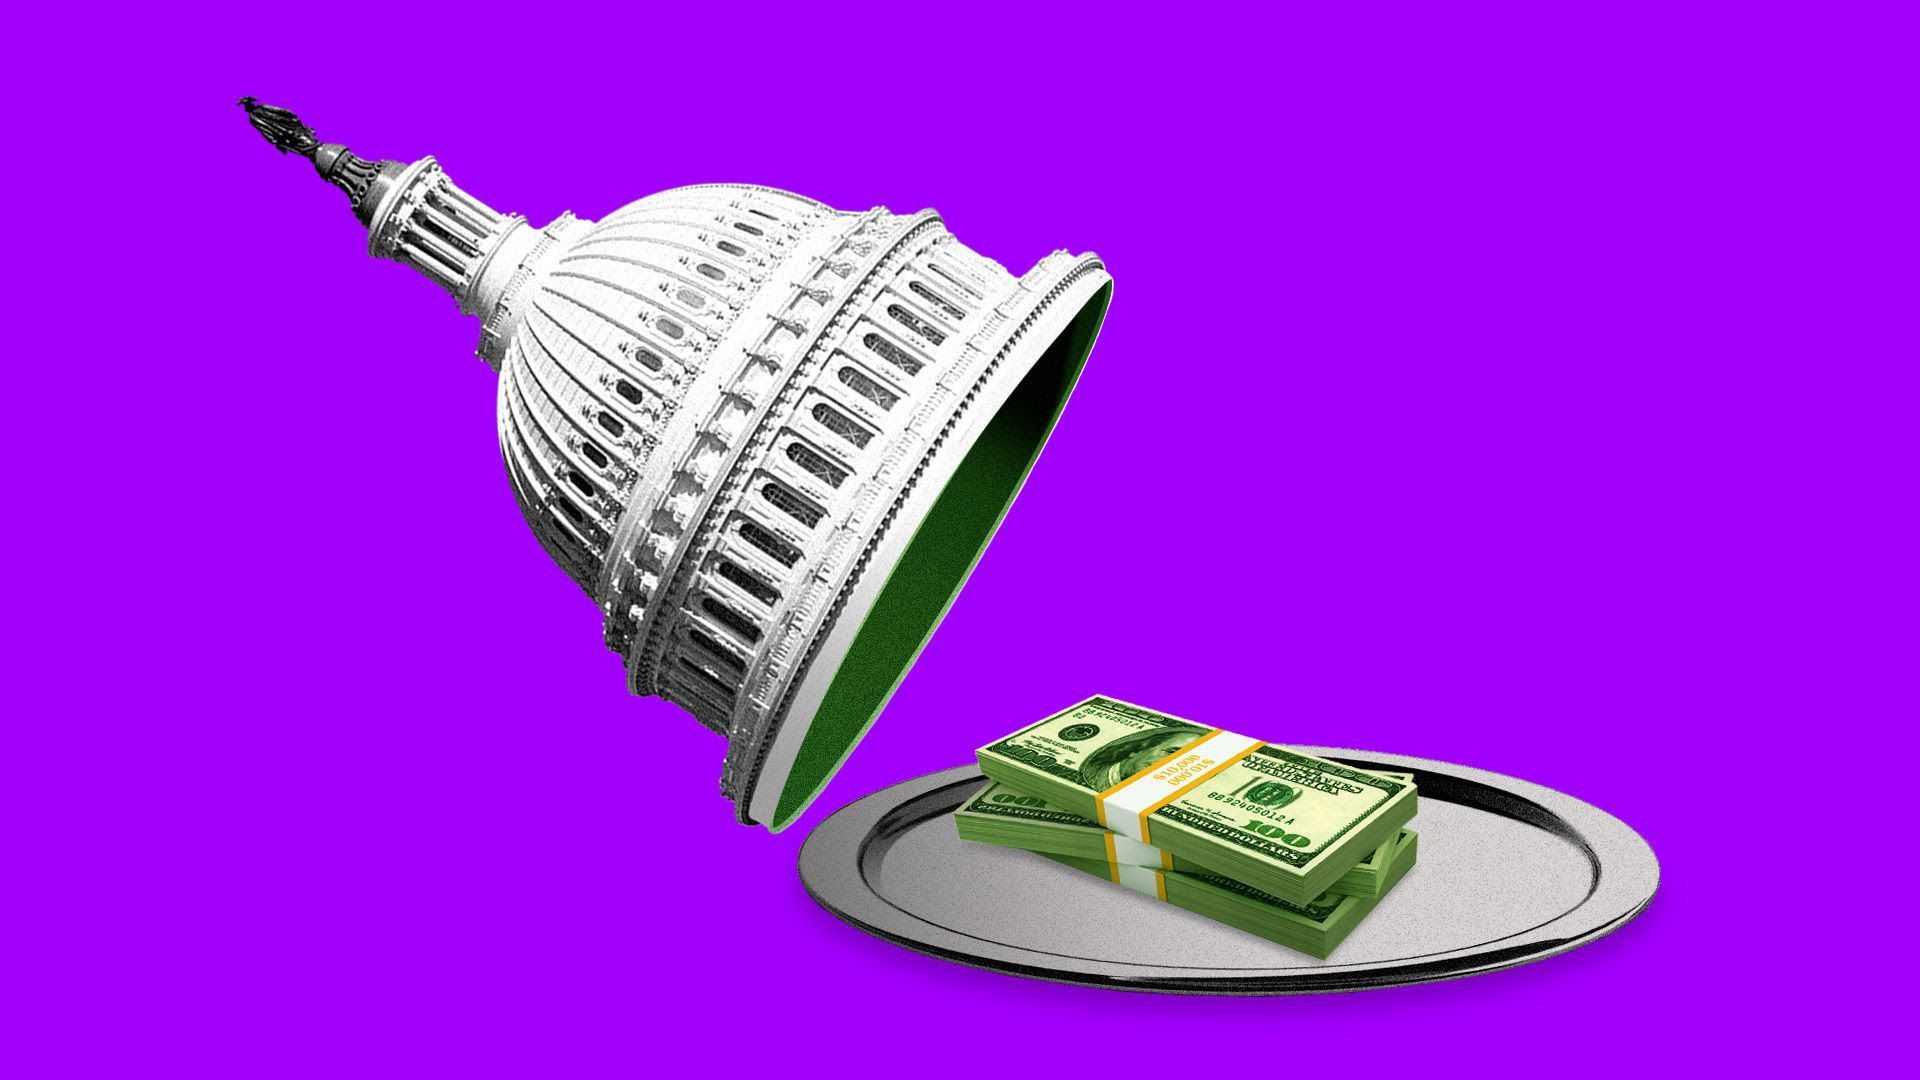 An illustration of money on a platter with the Congressional rotunda as the cap.